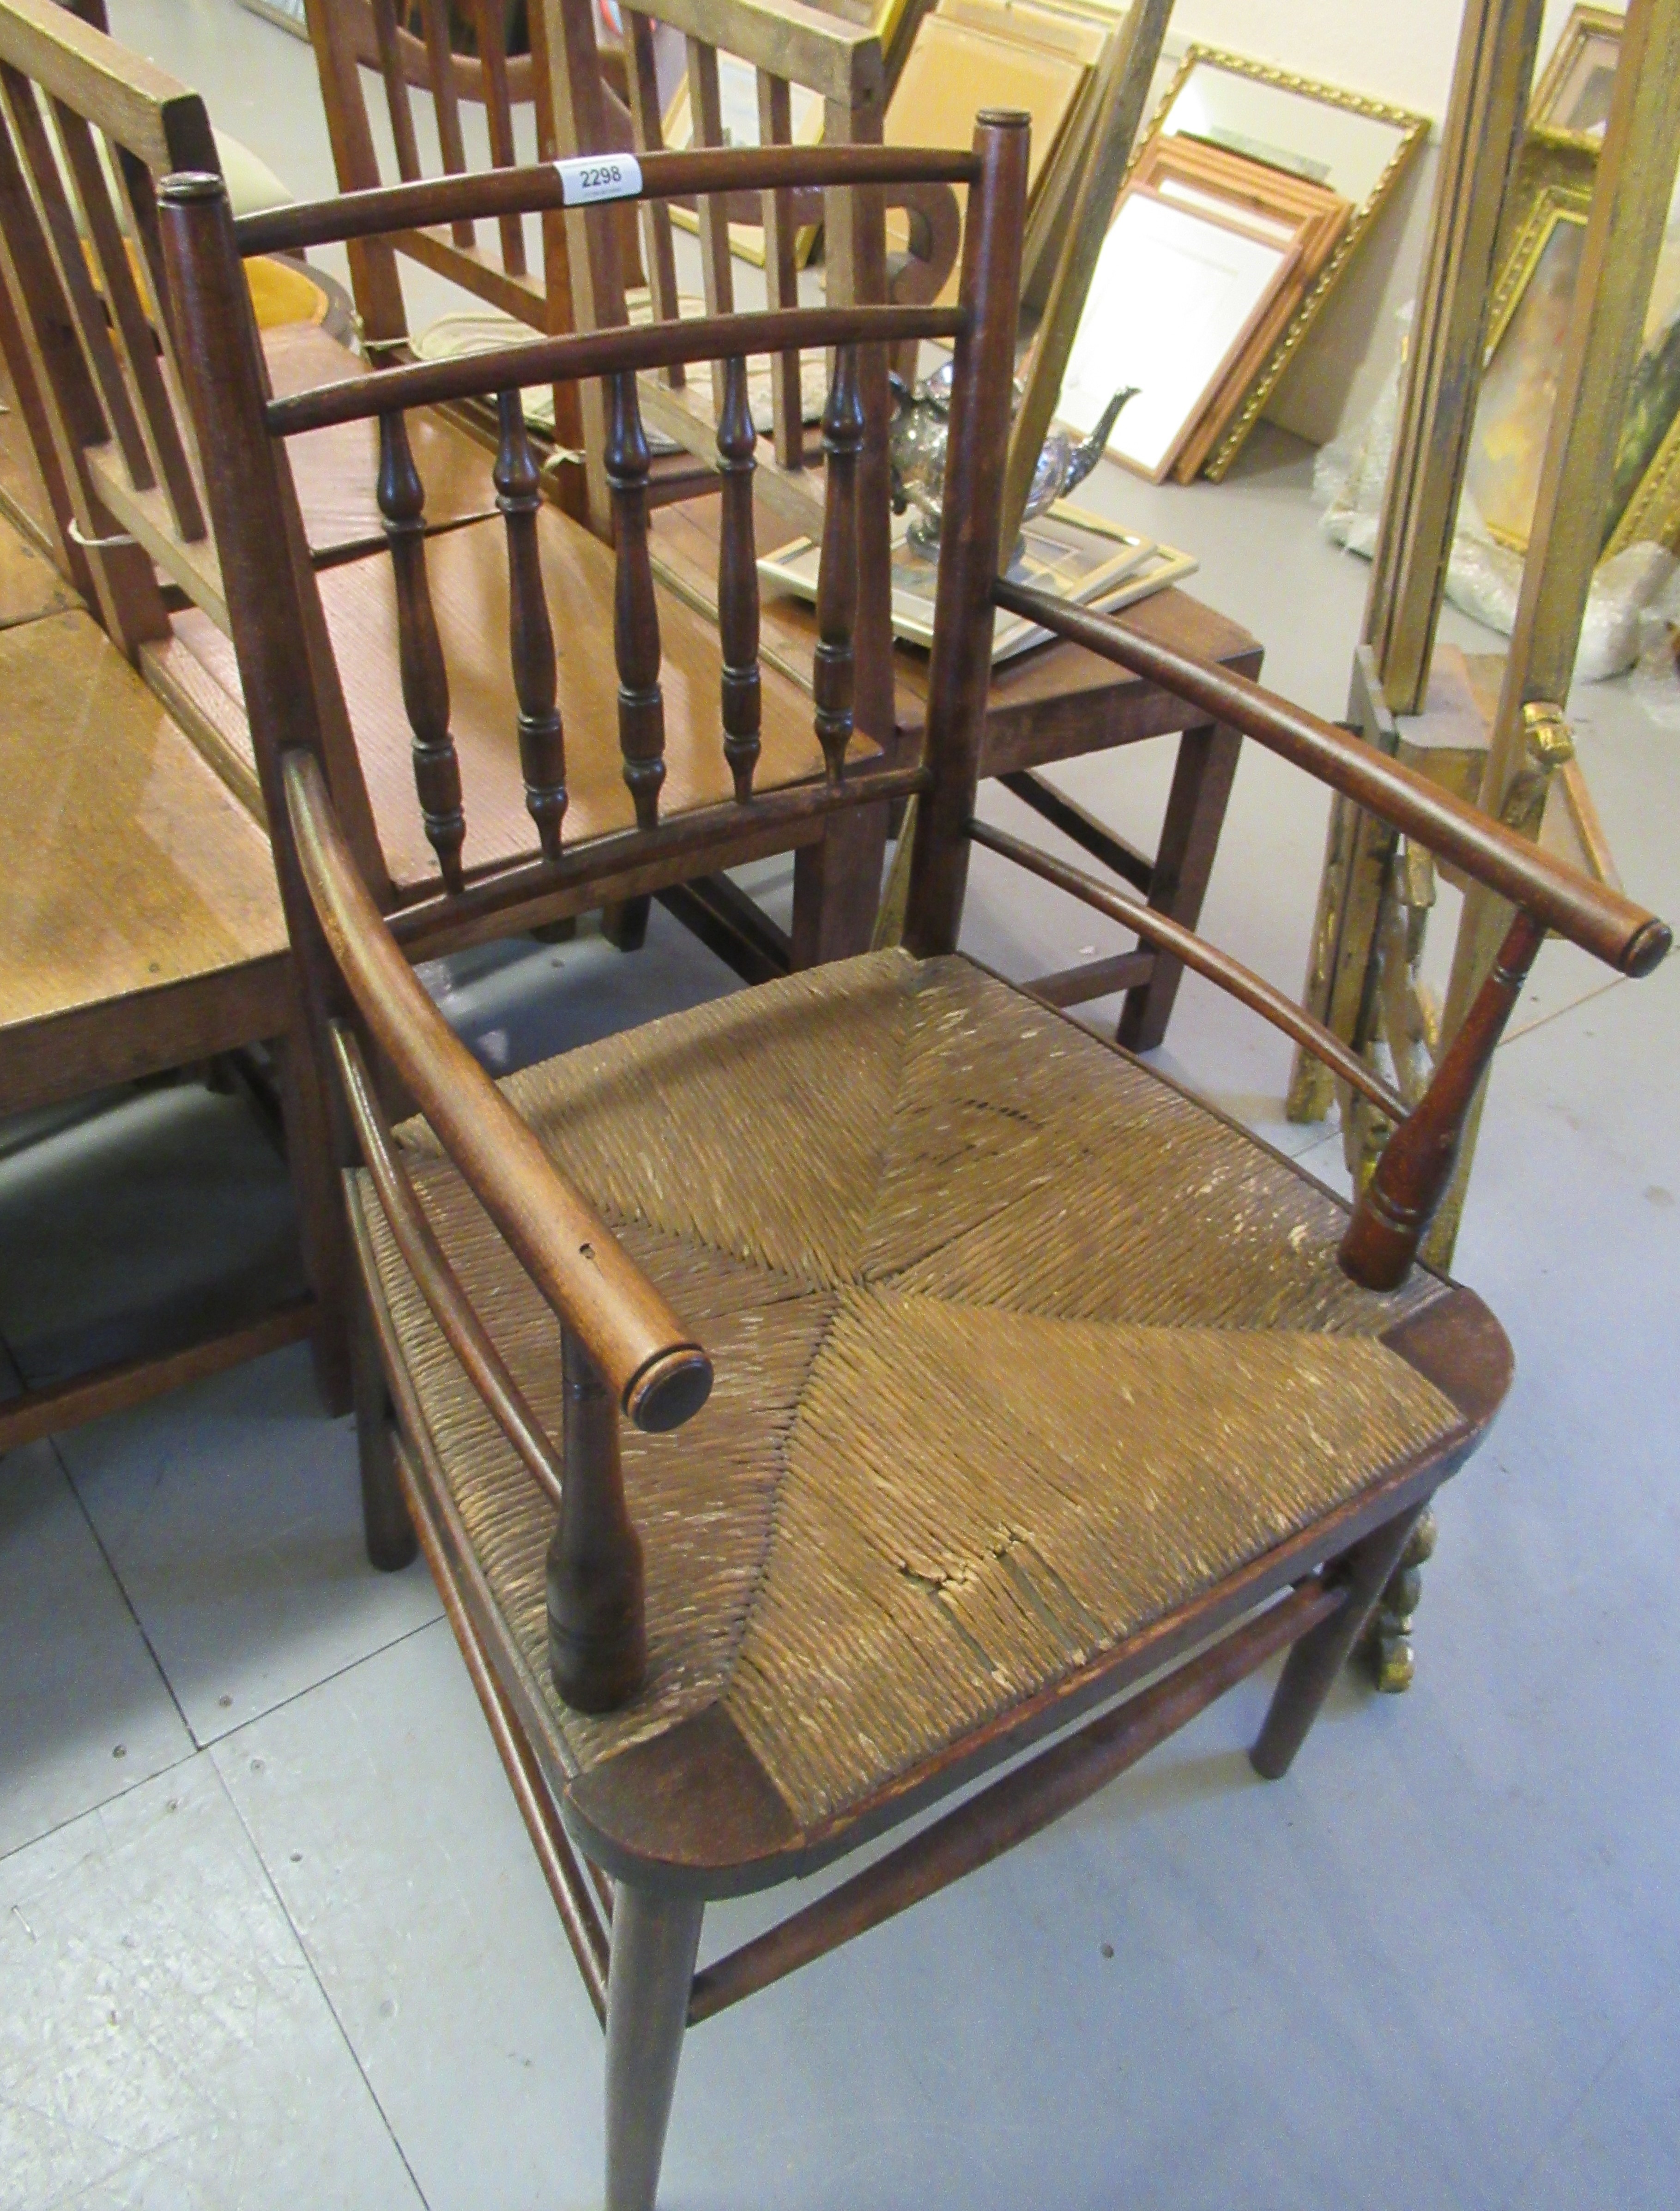 Morris & Co. Sussex chair with spindle back, rush seat and turned supports